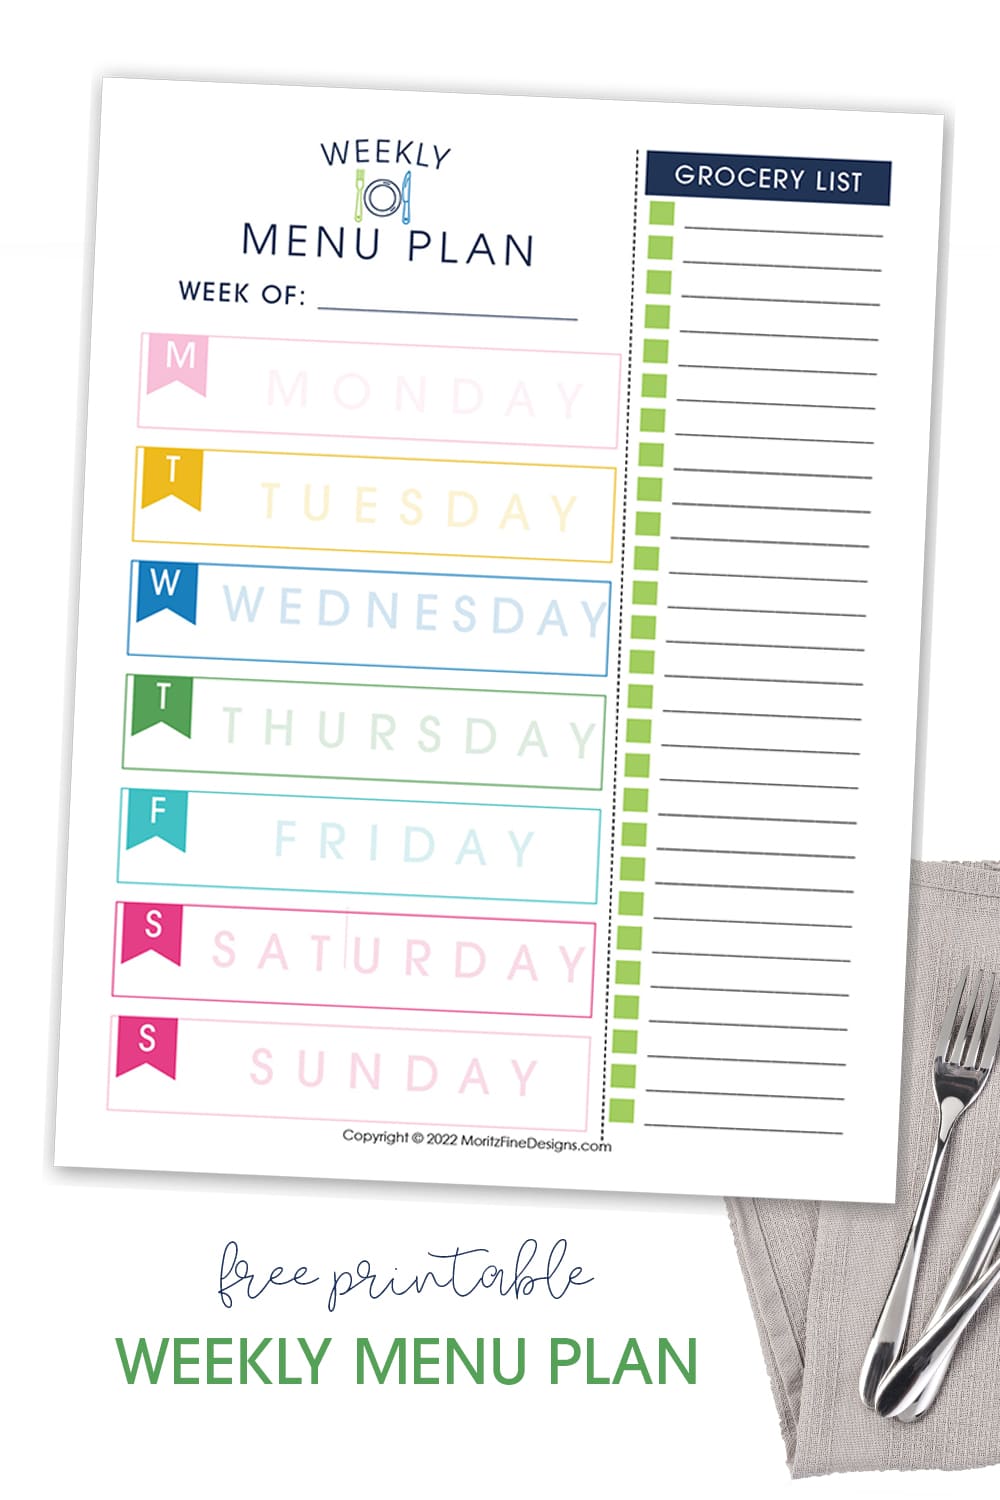 Do you struggle to get dinner on the table every night? Making dinner can be easy with the help of this free printable Weekly Menu Planner.